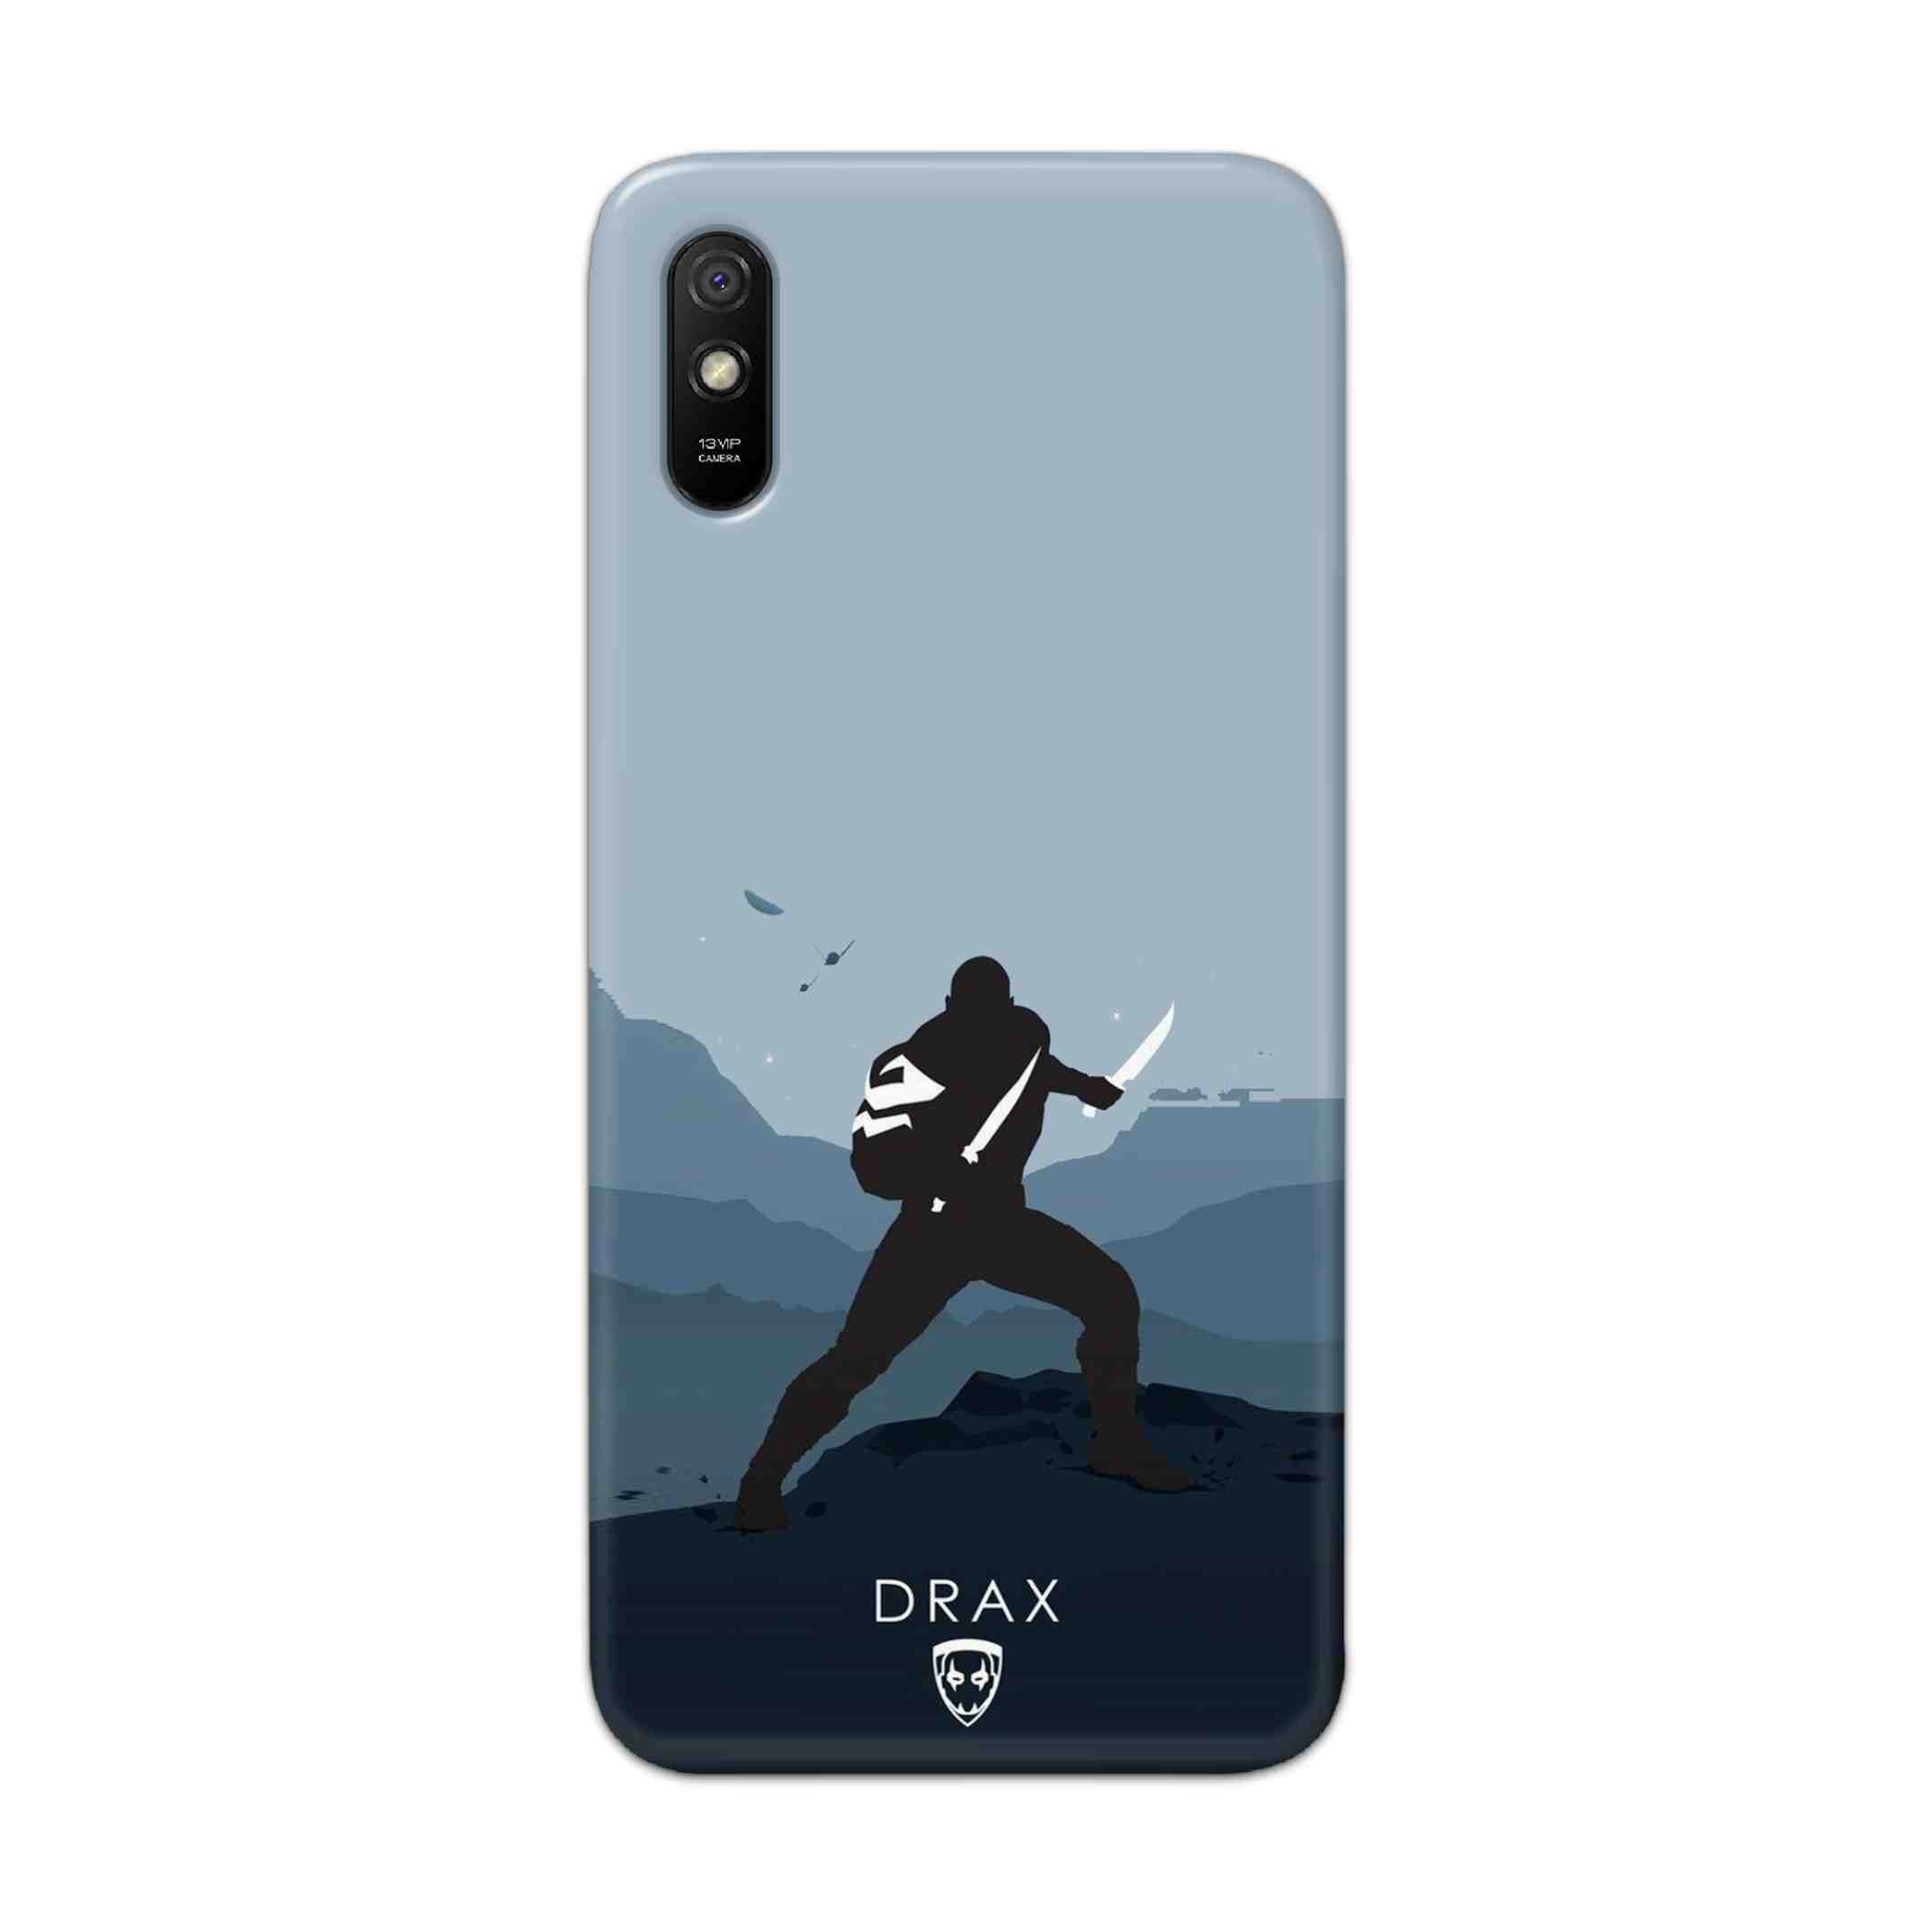 Buy Drax Hard Back Mobile Phone Case Cover For Redmi 9A Online